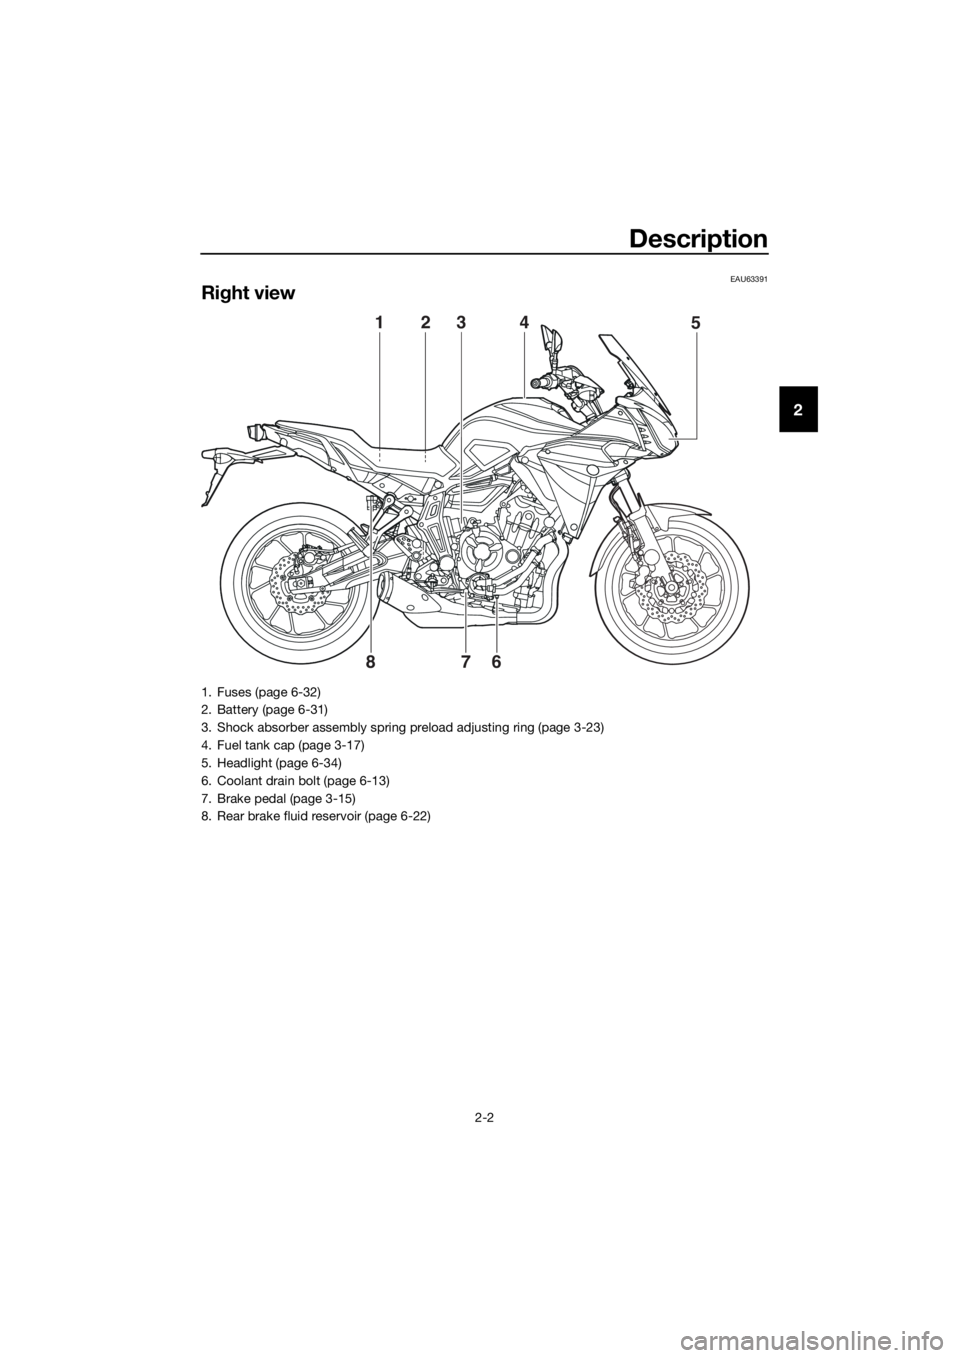 YAMAHA TRACER 700 2017 User Guide Description
2-2
2
EAU63391
Right view
215
6
7 8
34
1. Fuses (page 6-32)
2. Battery (page 6-31)
3. Shock absorber assembly spring preload adjusting ring (page 3-23)
4. Fuel tank cap (page 3-17)
5. Head